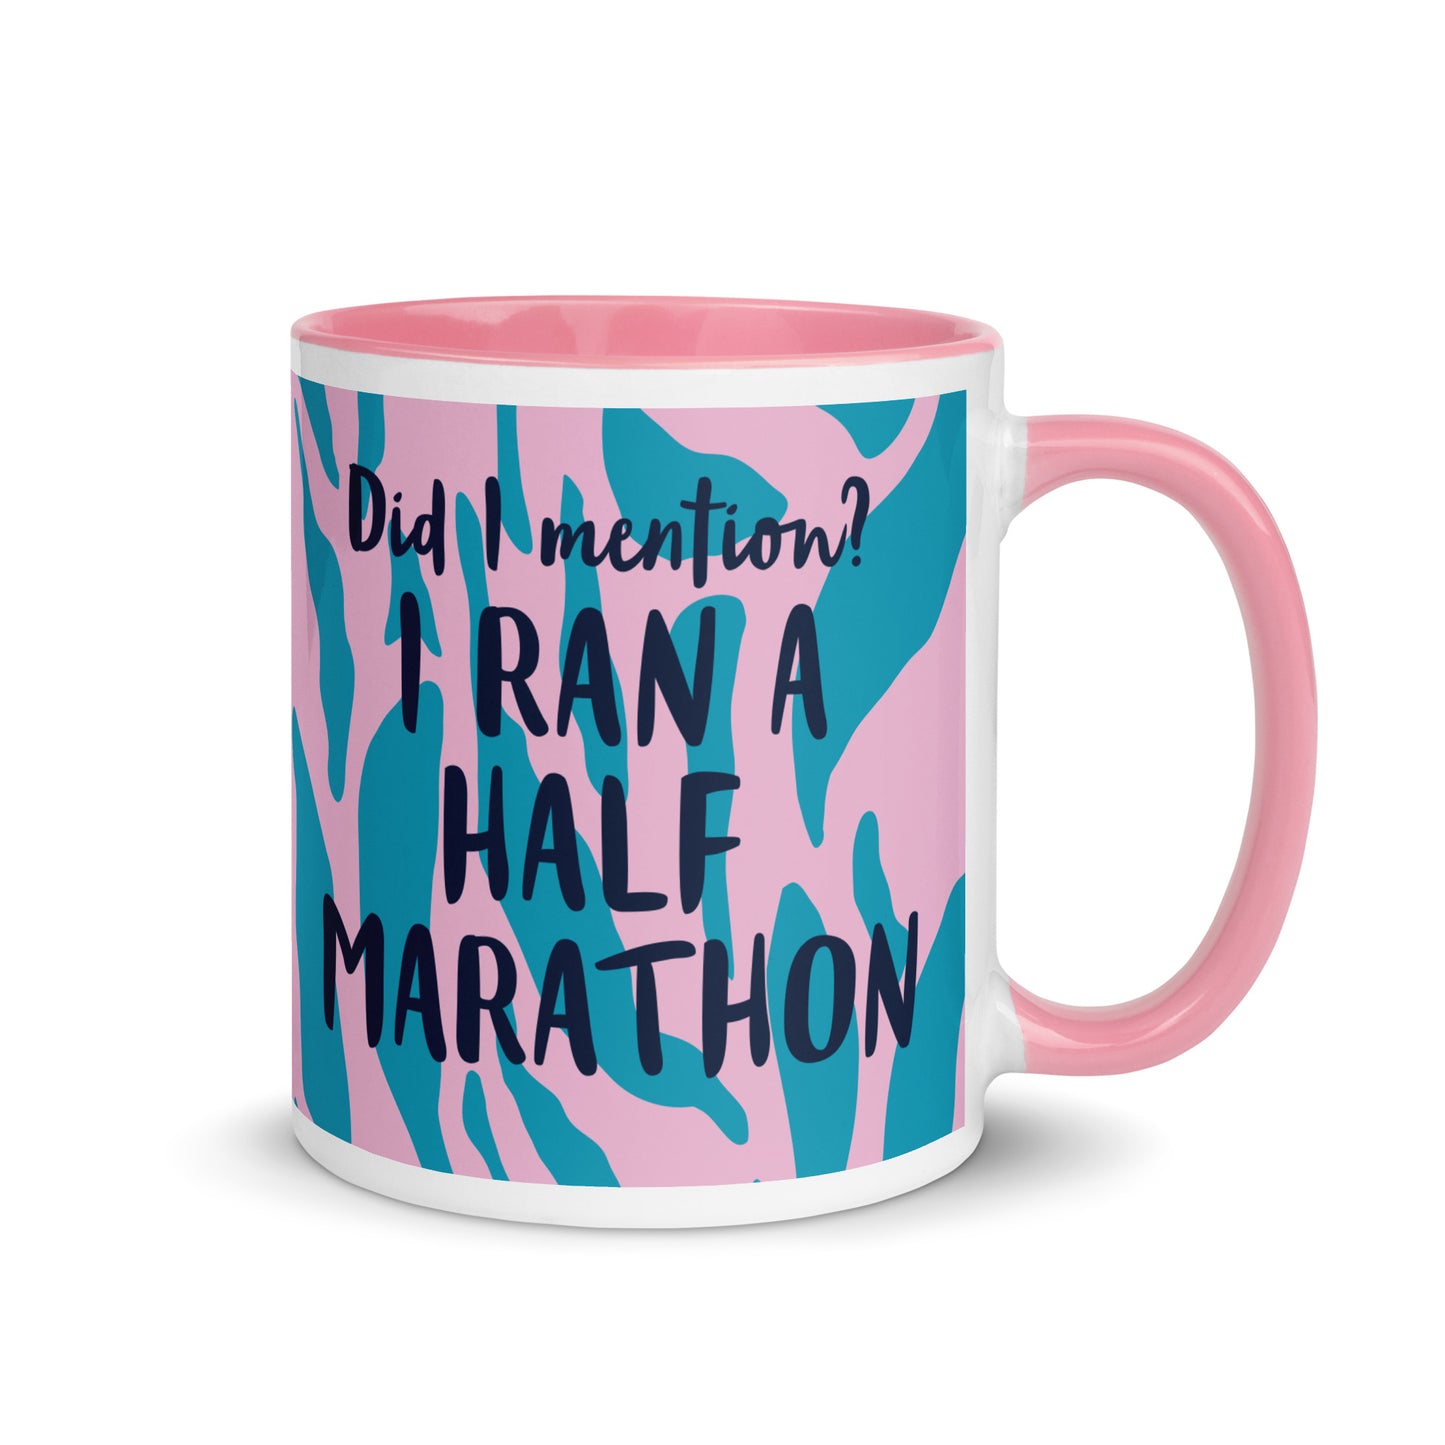 pink handled mug with pink and blue tiger print, and the phrase did i mention? I ran a marathon in a bold font